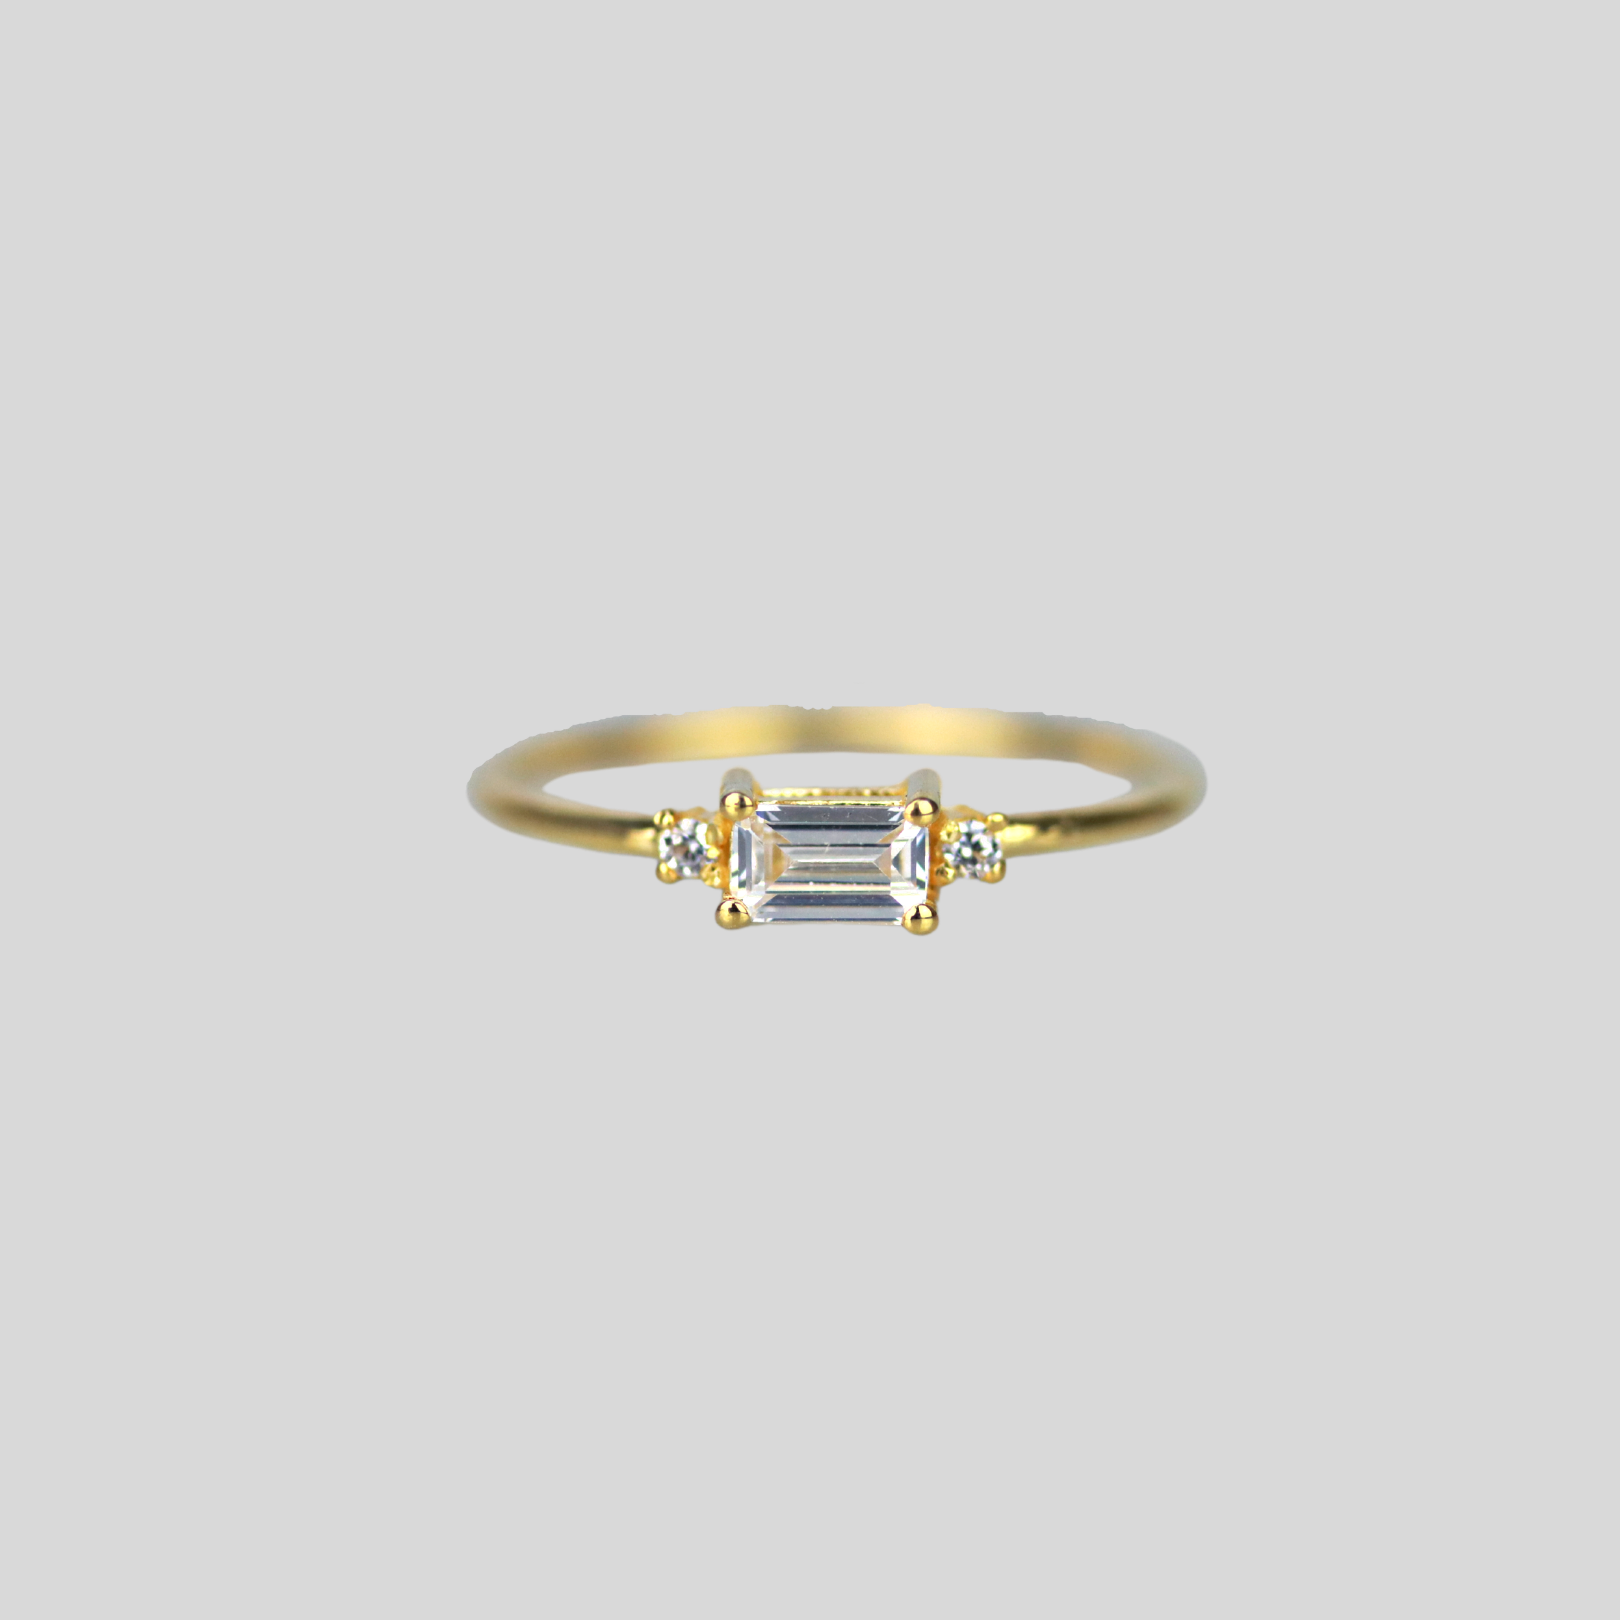 Solid 14k gold ring with east-west emerald cut cz